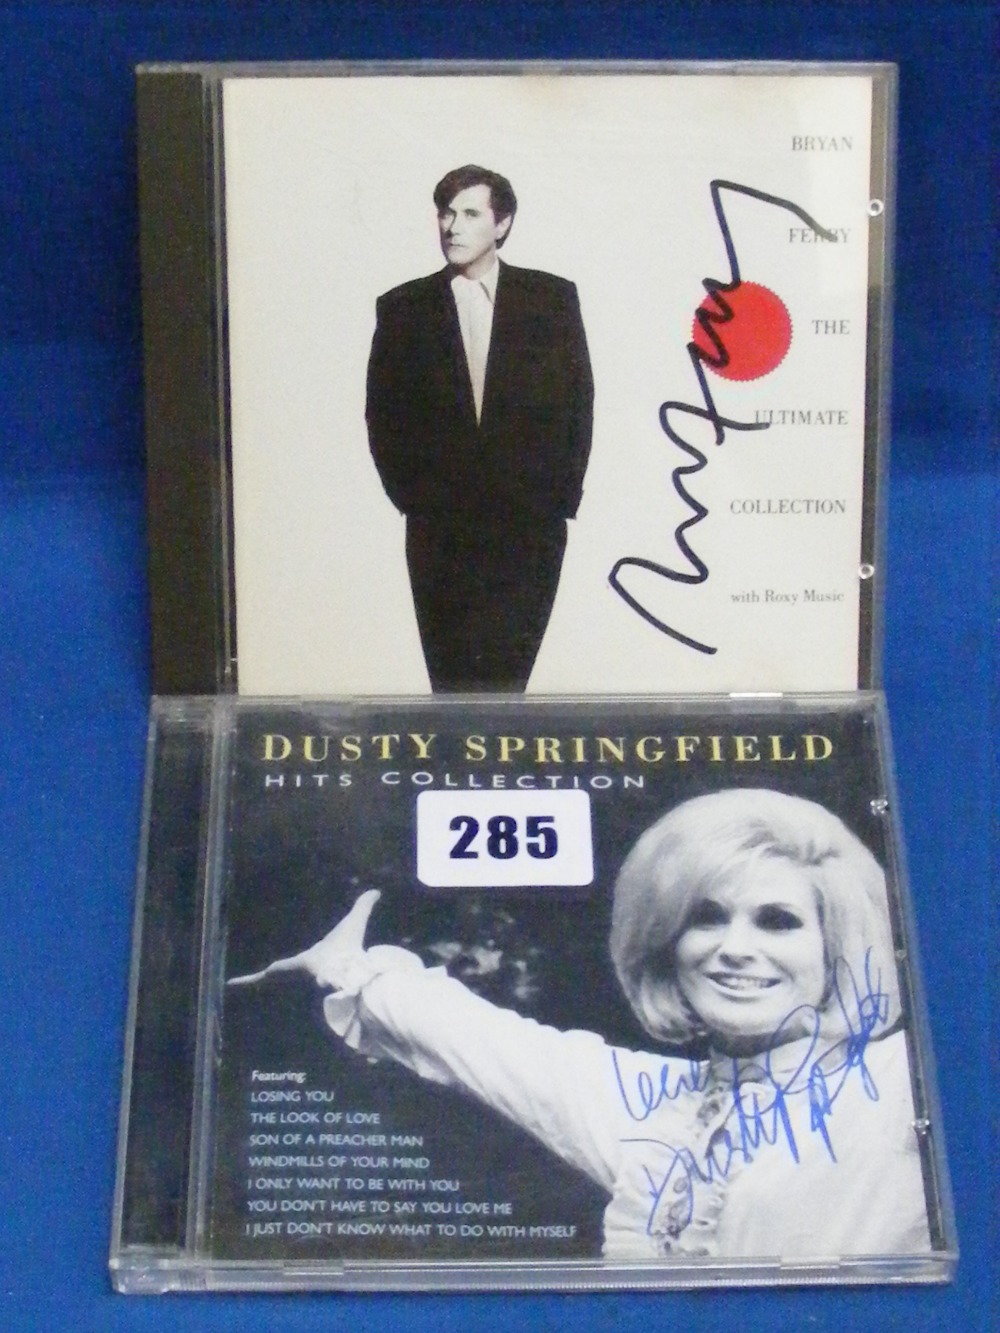 Bryan Ferry/Dusty Springfield.   Two signed C.D.'s, Ferry's Ultimate Collection and Springfield's